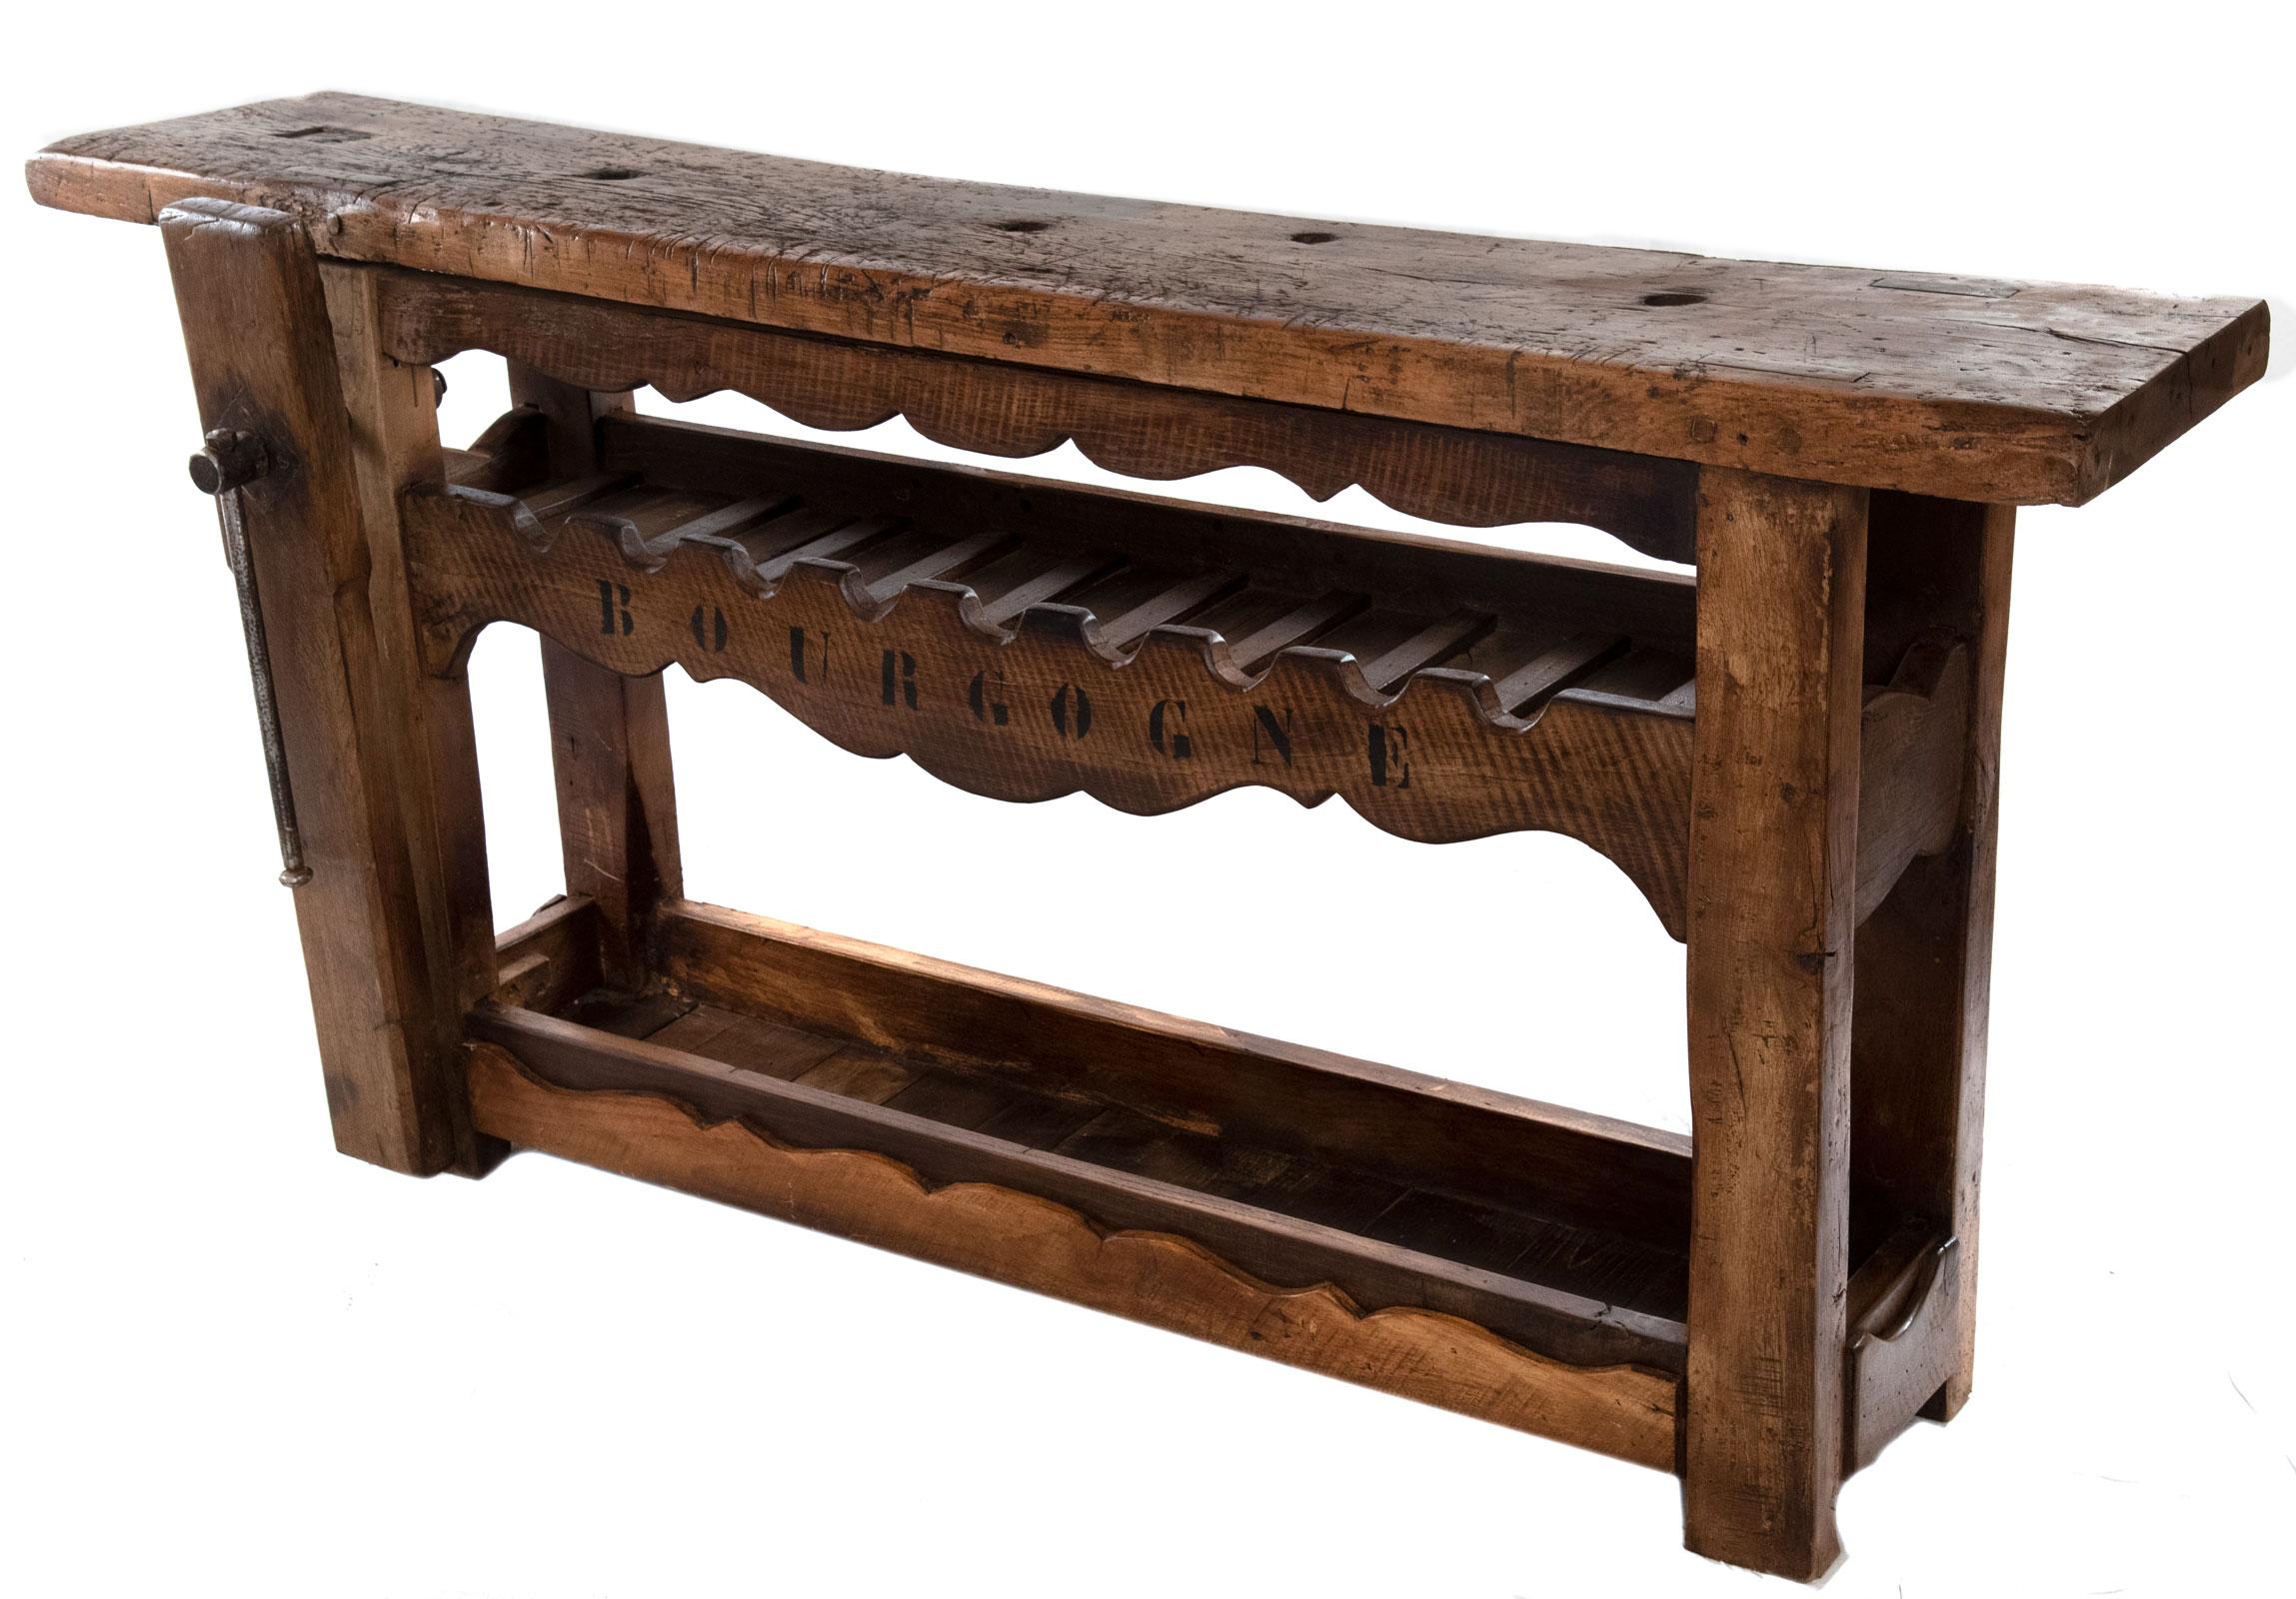 Made from 19th century French walnut, each bench dates to the 1870s in Lyon. Each bench bears the marks of generations of use. A small furniture maker in Lyon has recently acquired a limited number of these traditional benches, side-tables, and